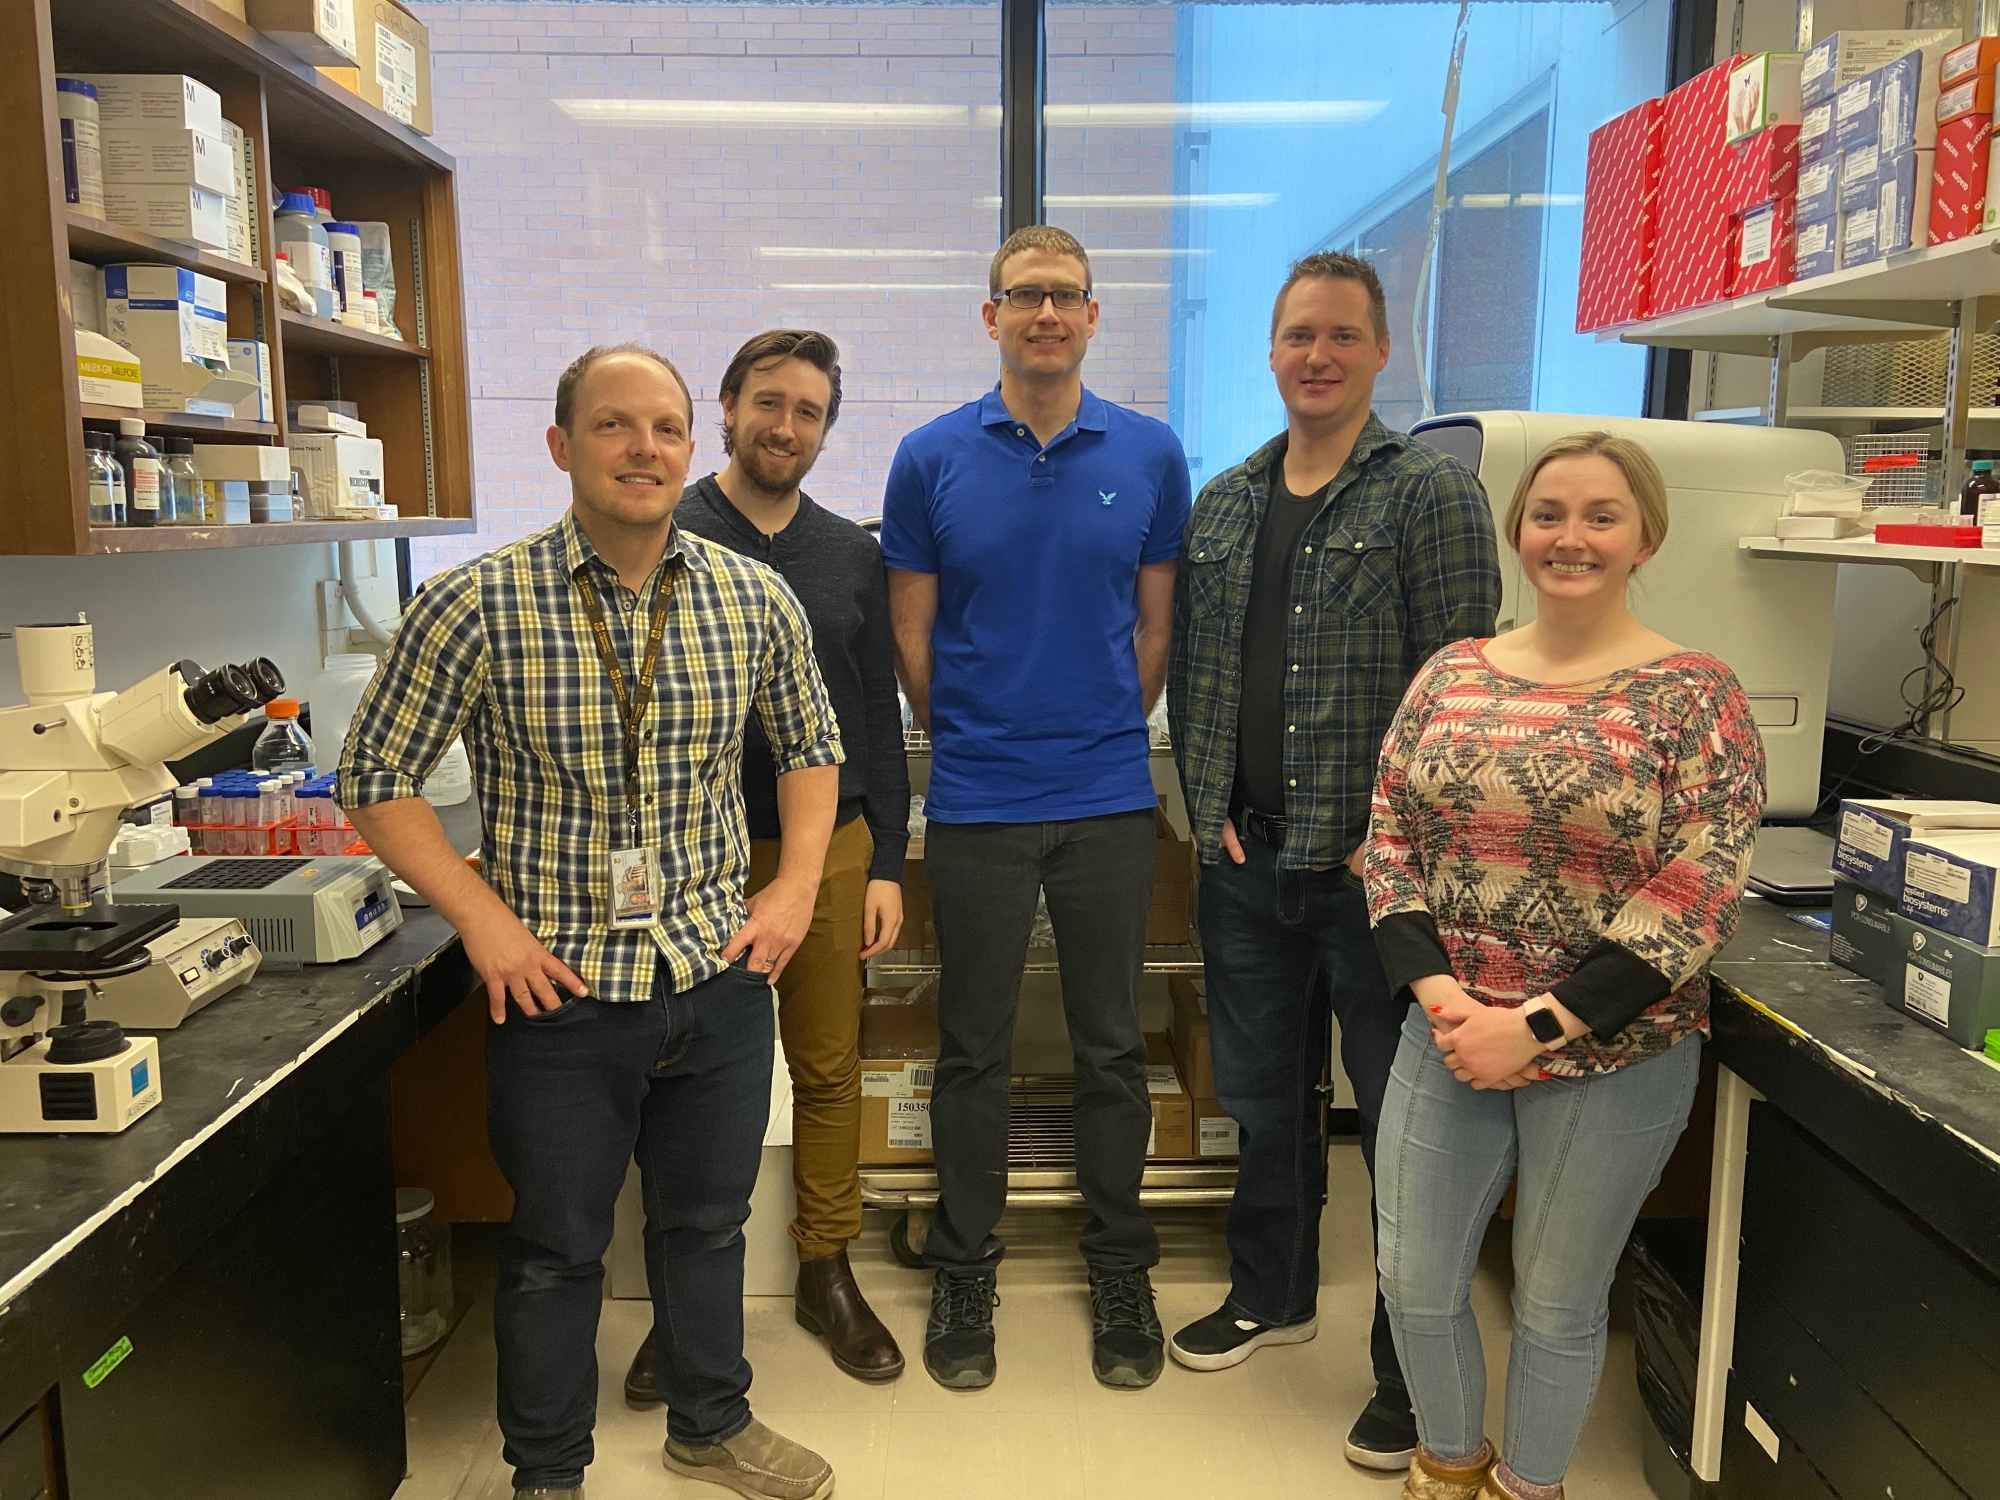 Brayden Schindell is working with a team of researchers in the Kindrachuk lab. Left to right: Jason Kindrachuk, Brayden Schindell, Andrew Webb, Jared Rowell, Meagan Allardice